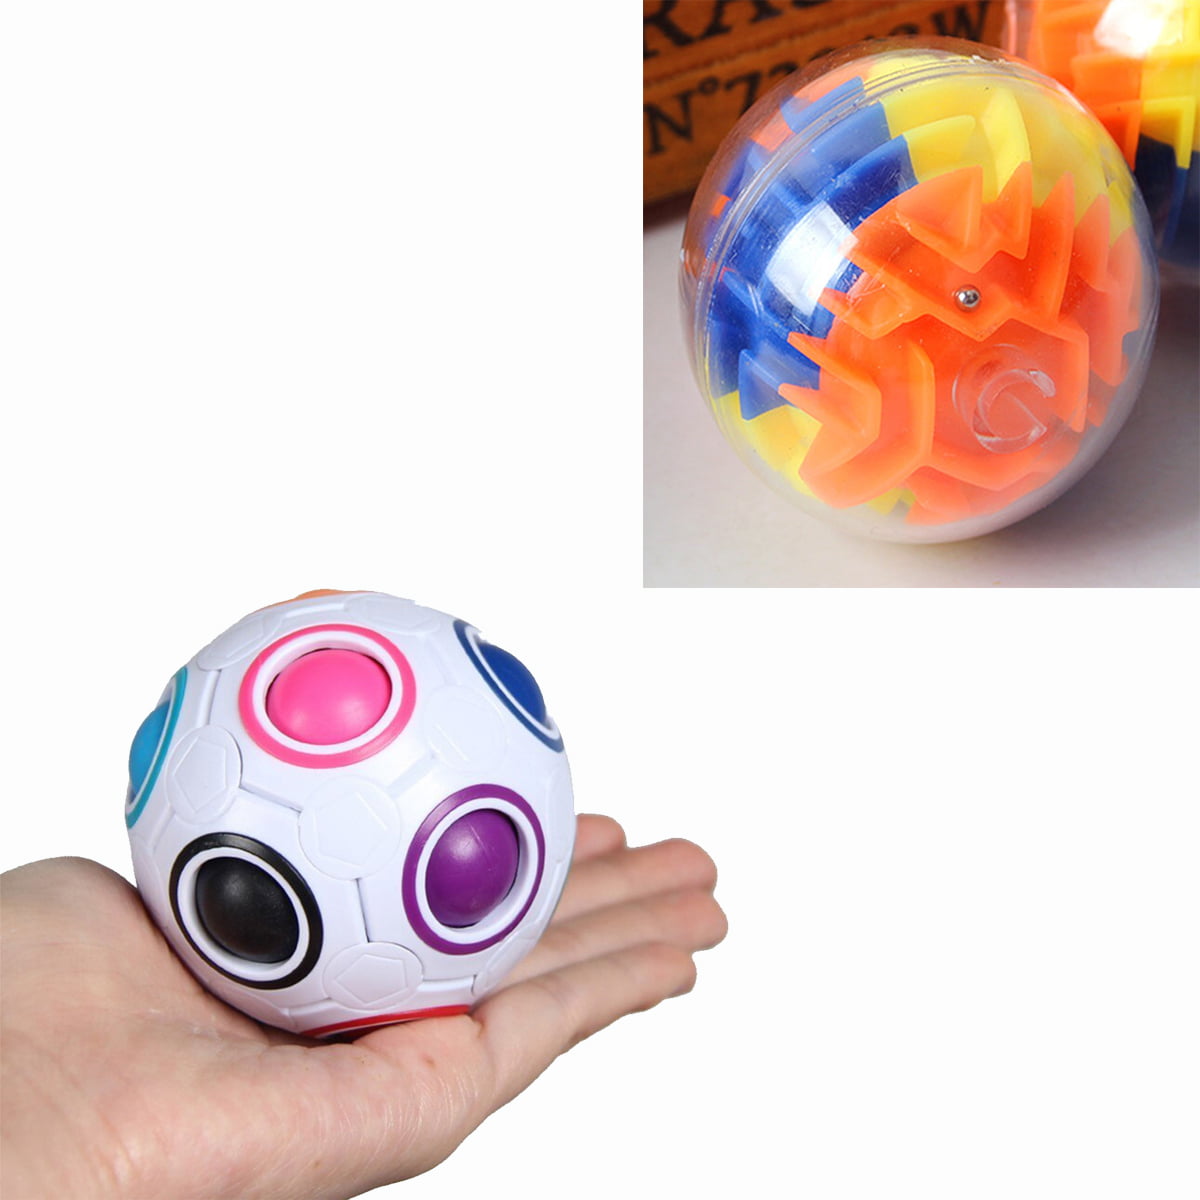 Details about   Flexible Fingers Rolling ball’s Game Board Fun Educational Toys for Babies Kids